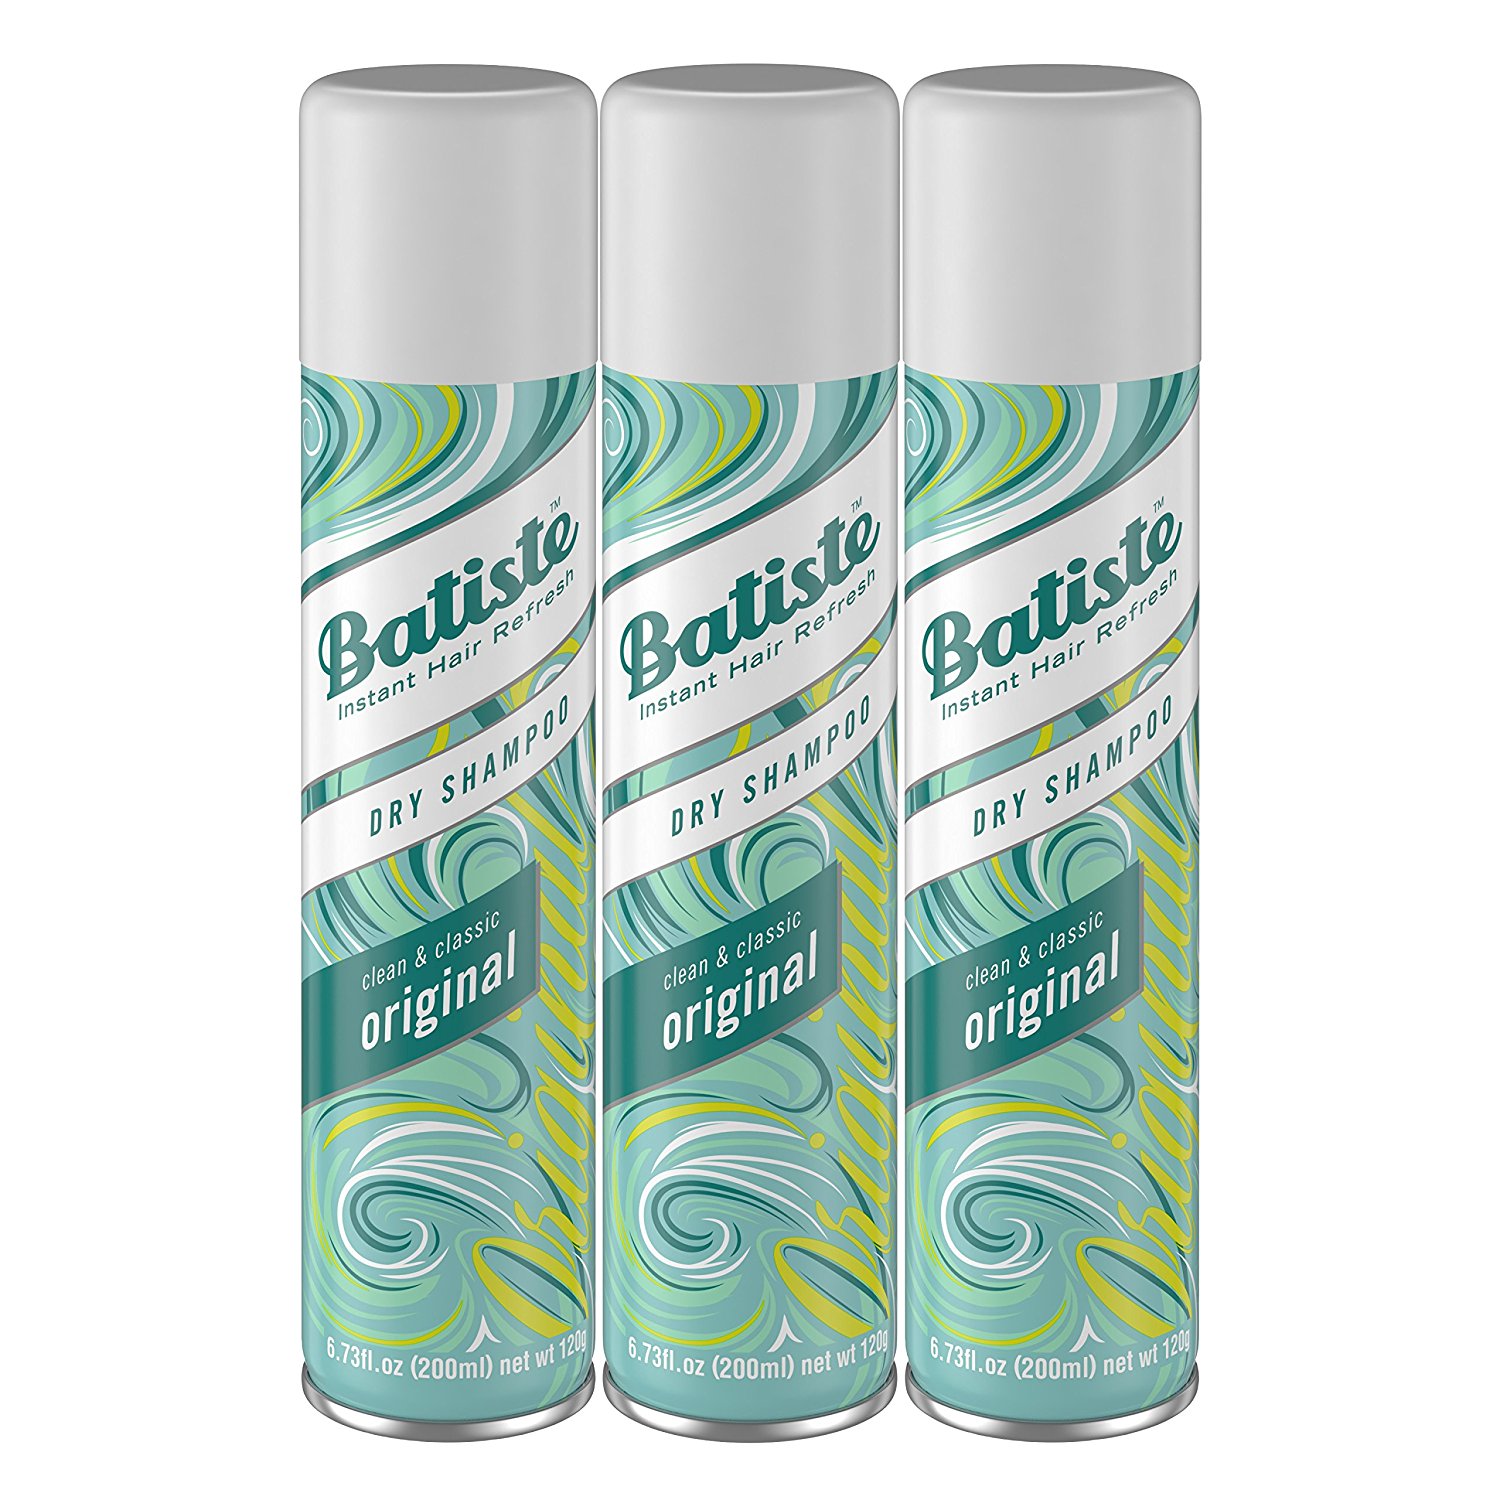 PRIME MEMBERS: Batiste Dry Shampoo 3 Pack Only $14.64 Shipped!